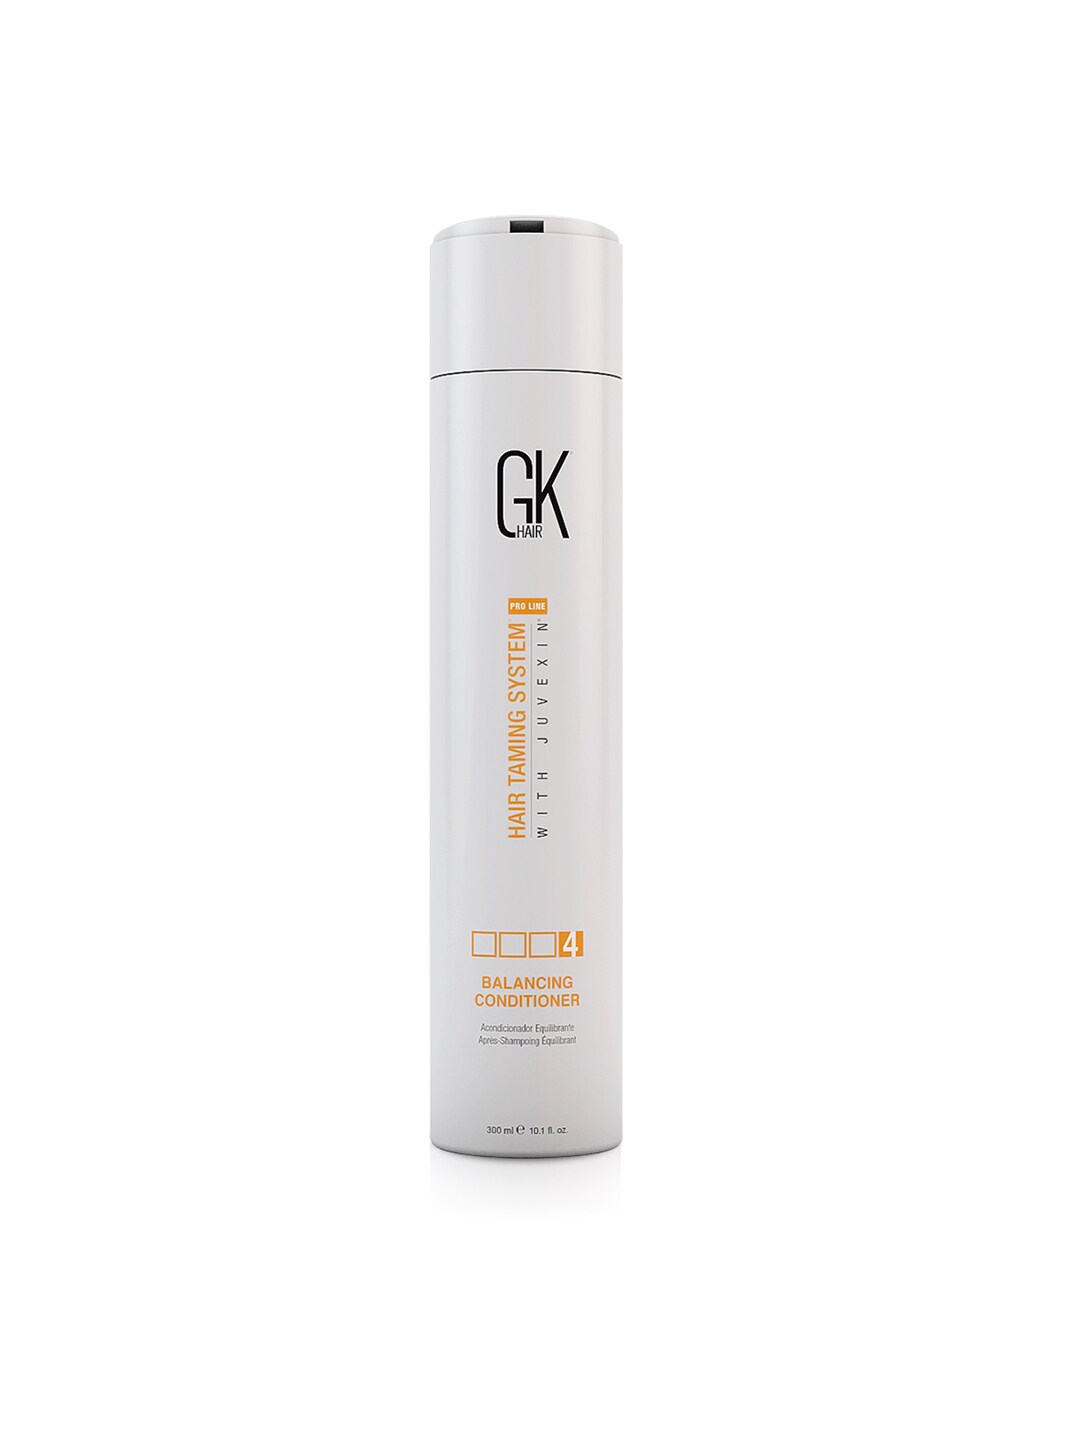 GK HAIR Pro Line Hair Taming System with Juvexin Balancing Hair Conditioner 300ml Price in India